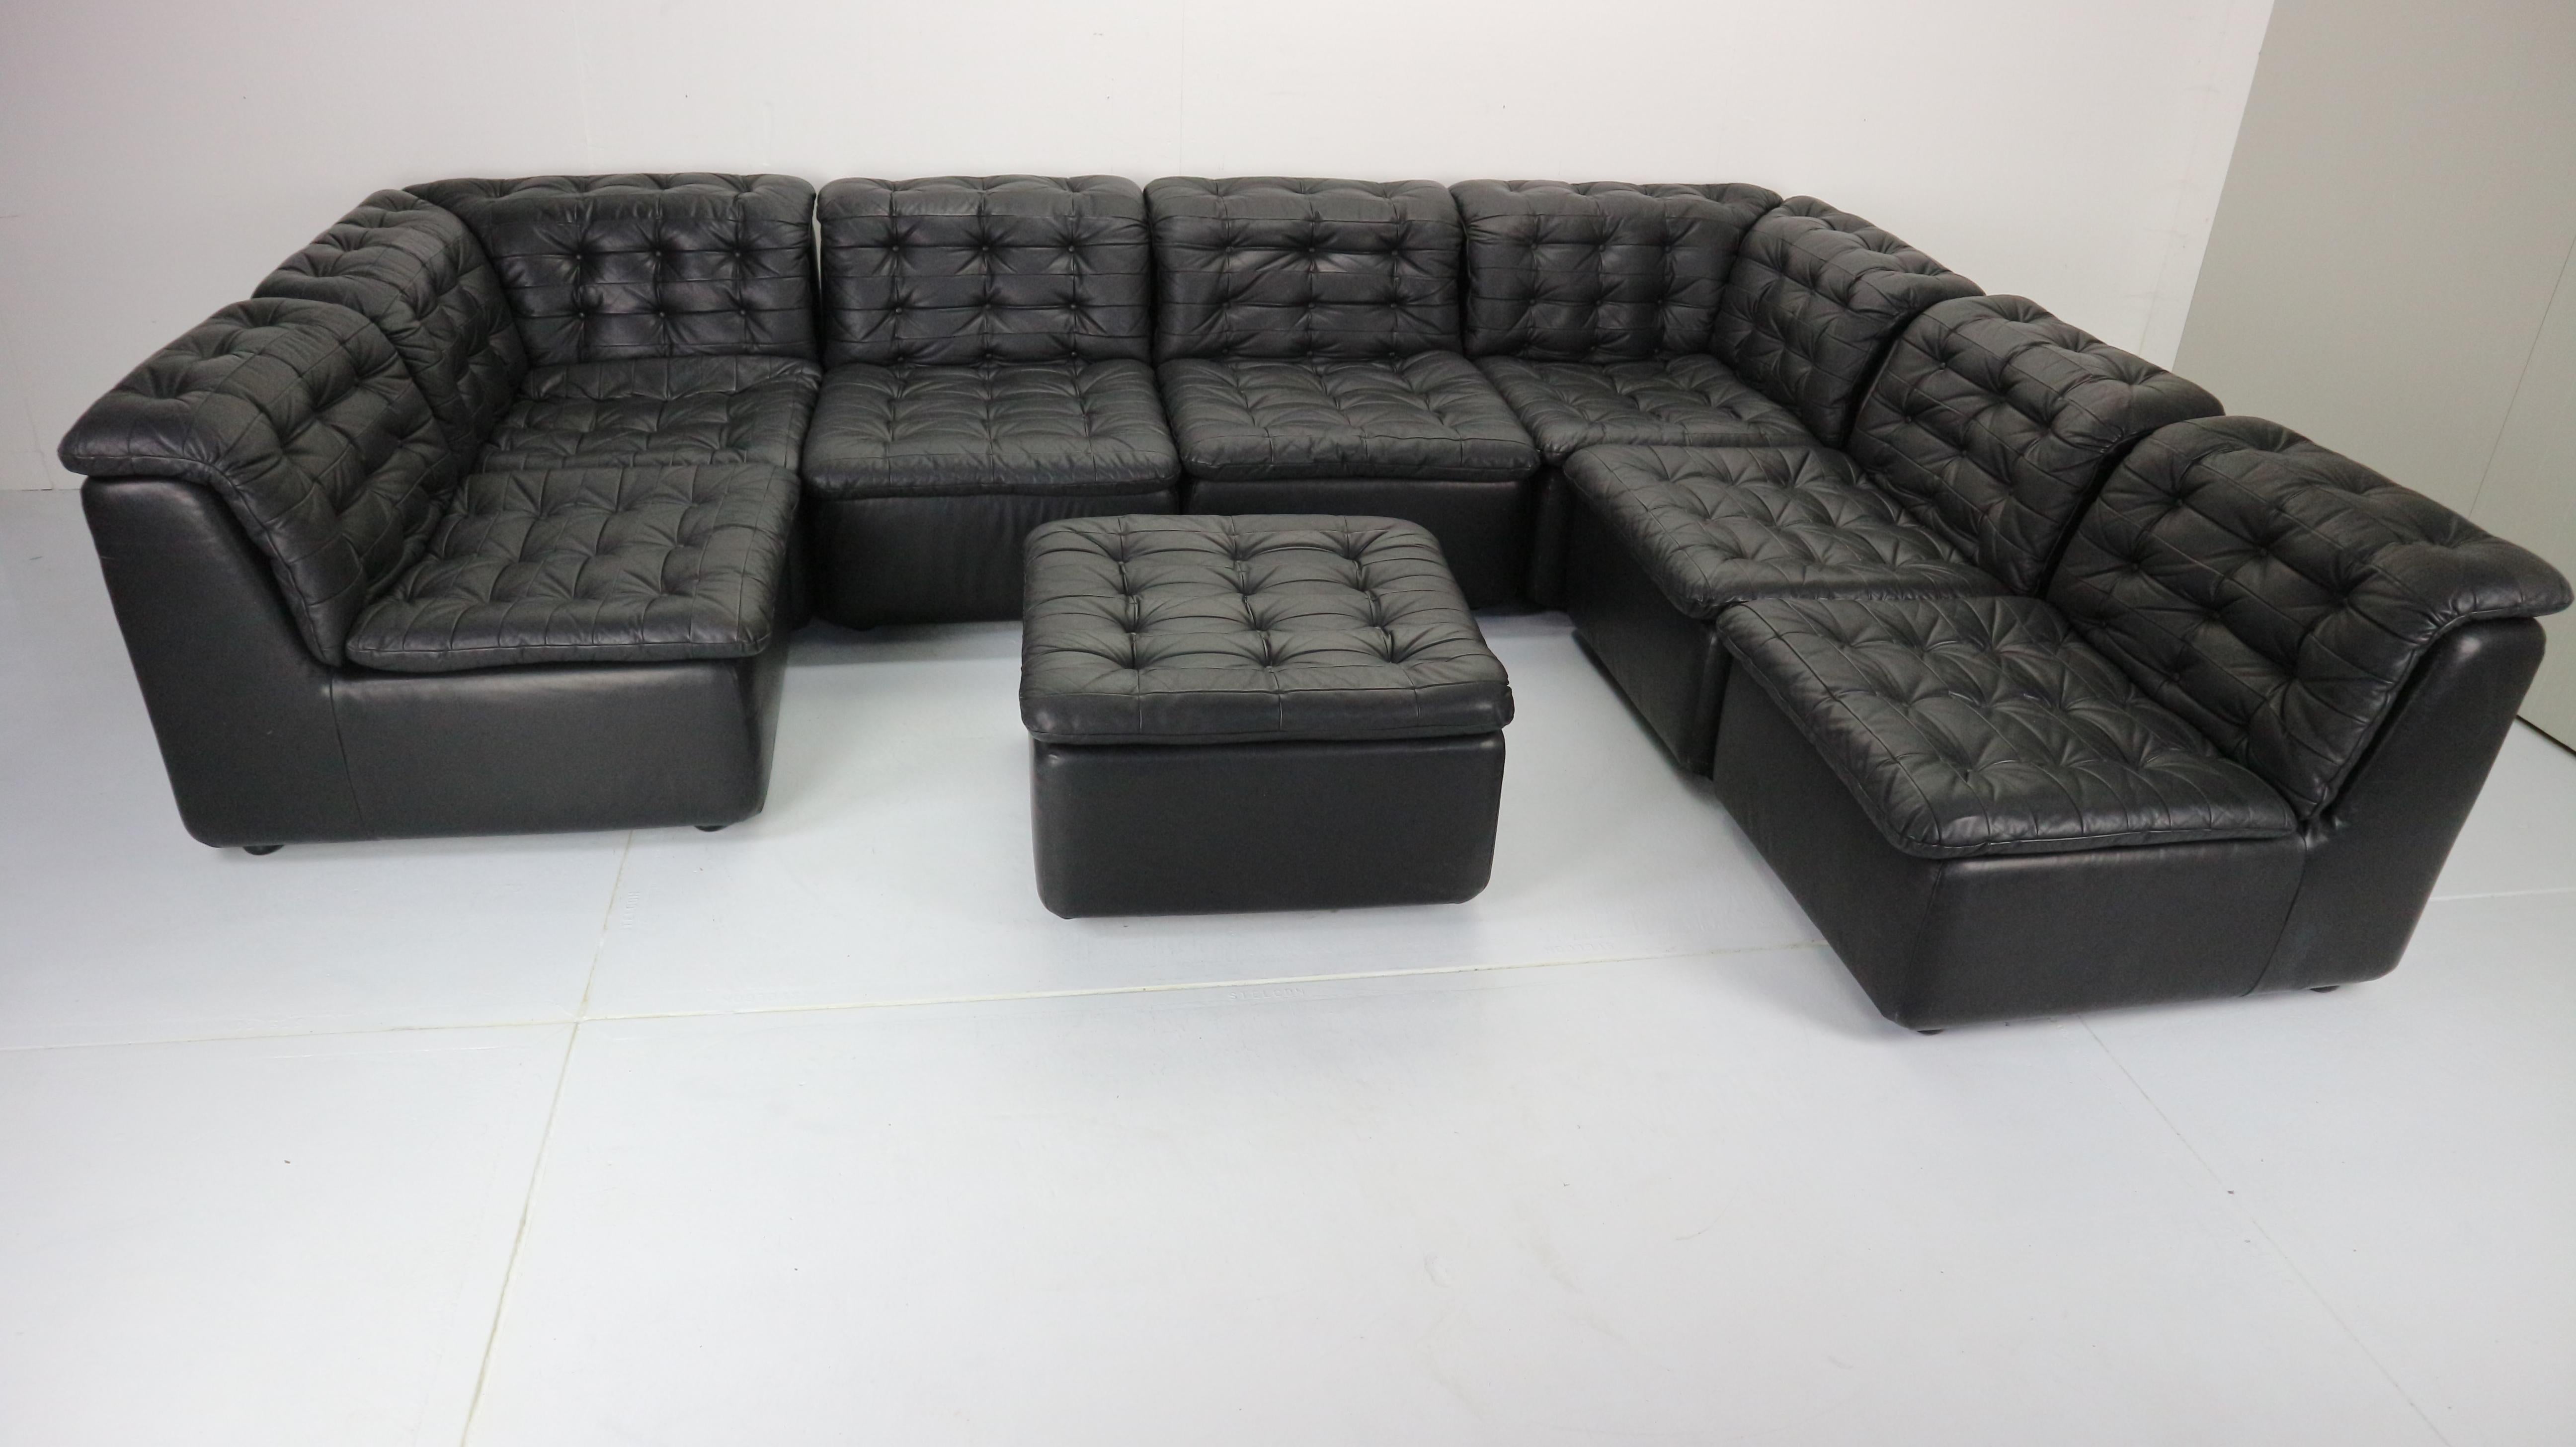 Mid-Century Modern design seven-seat sofa made in 1970s.
This sofa comes within an ottoman and seven sectional pieces witch you can easily move around and make your own comfortable design connecting with metal connecters of the bottom of the couch